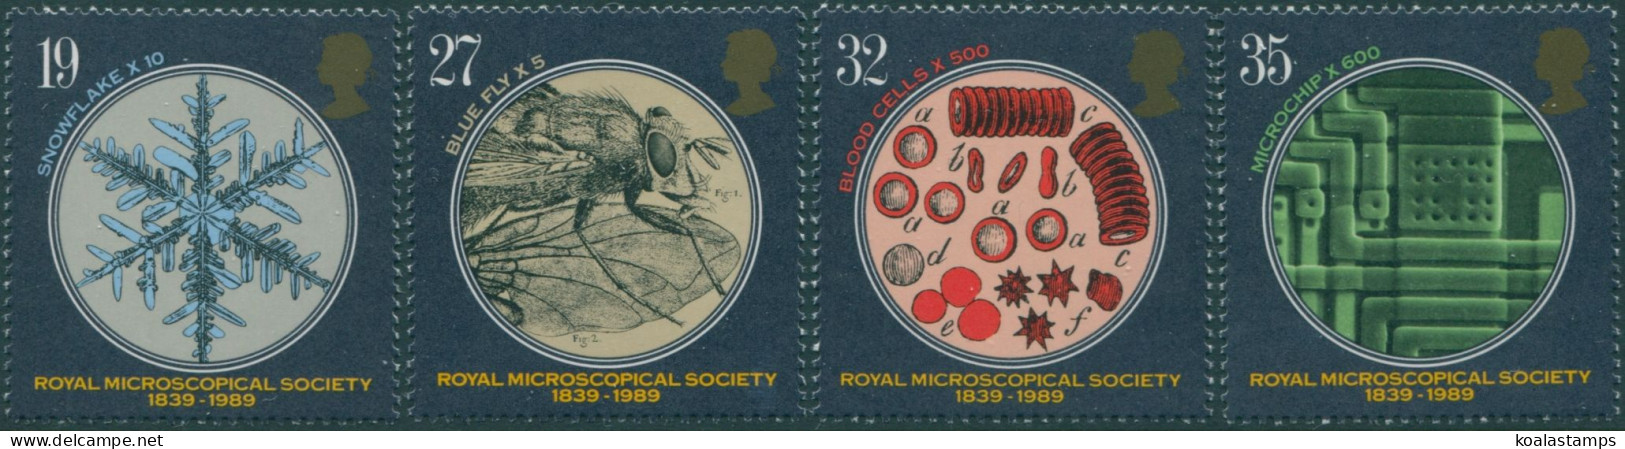 Great Britain 1989 SG1453-1456 QEII Microscopical Set MNH - Unclassified